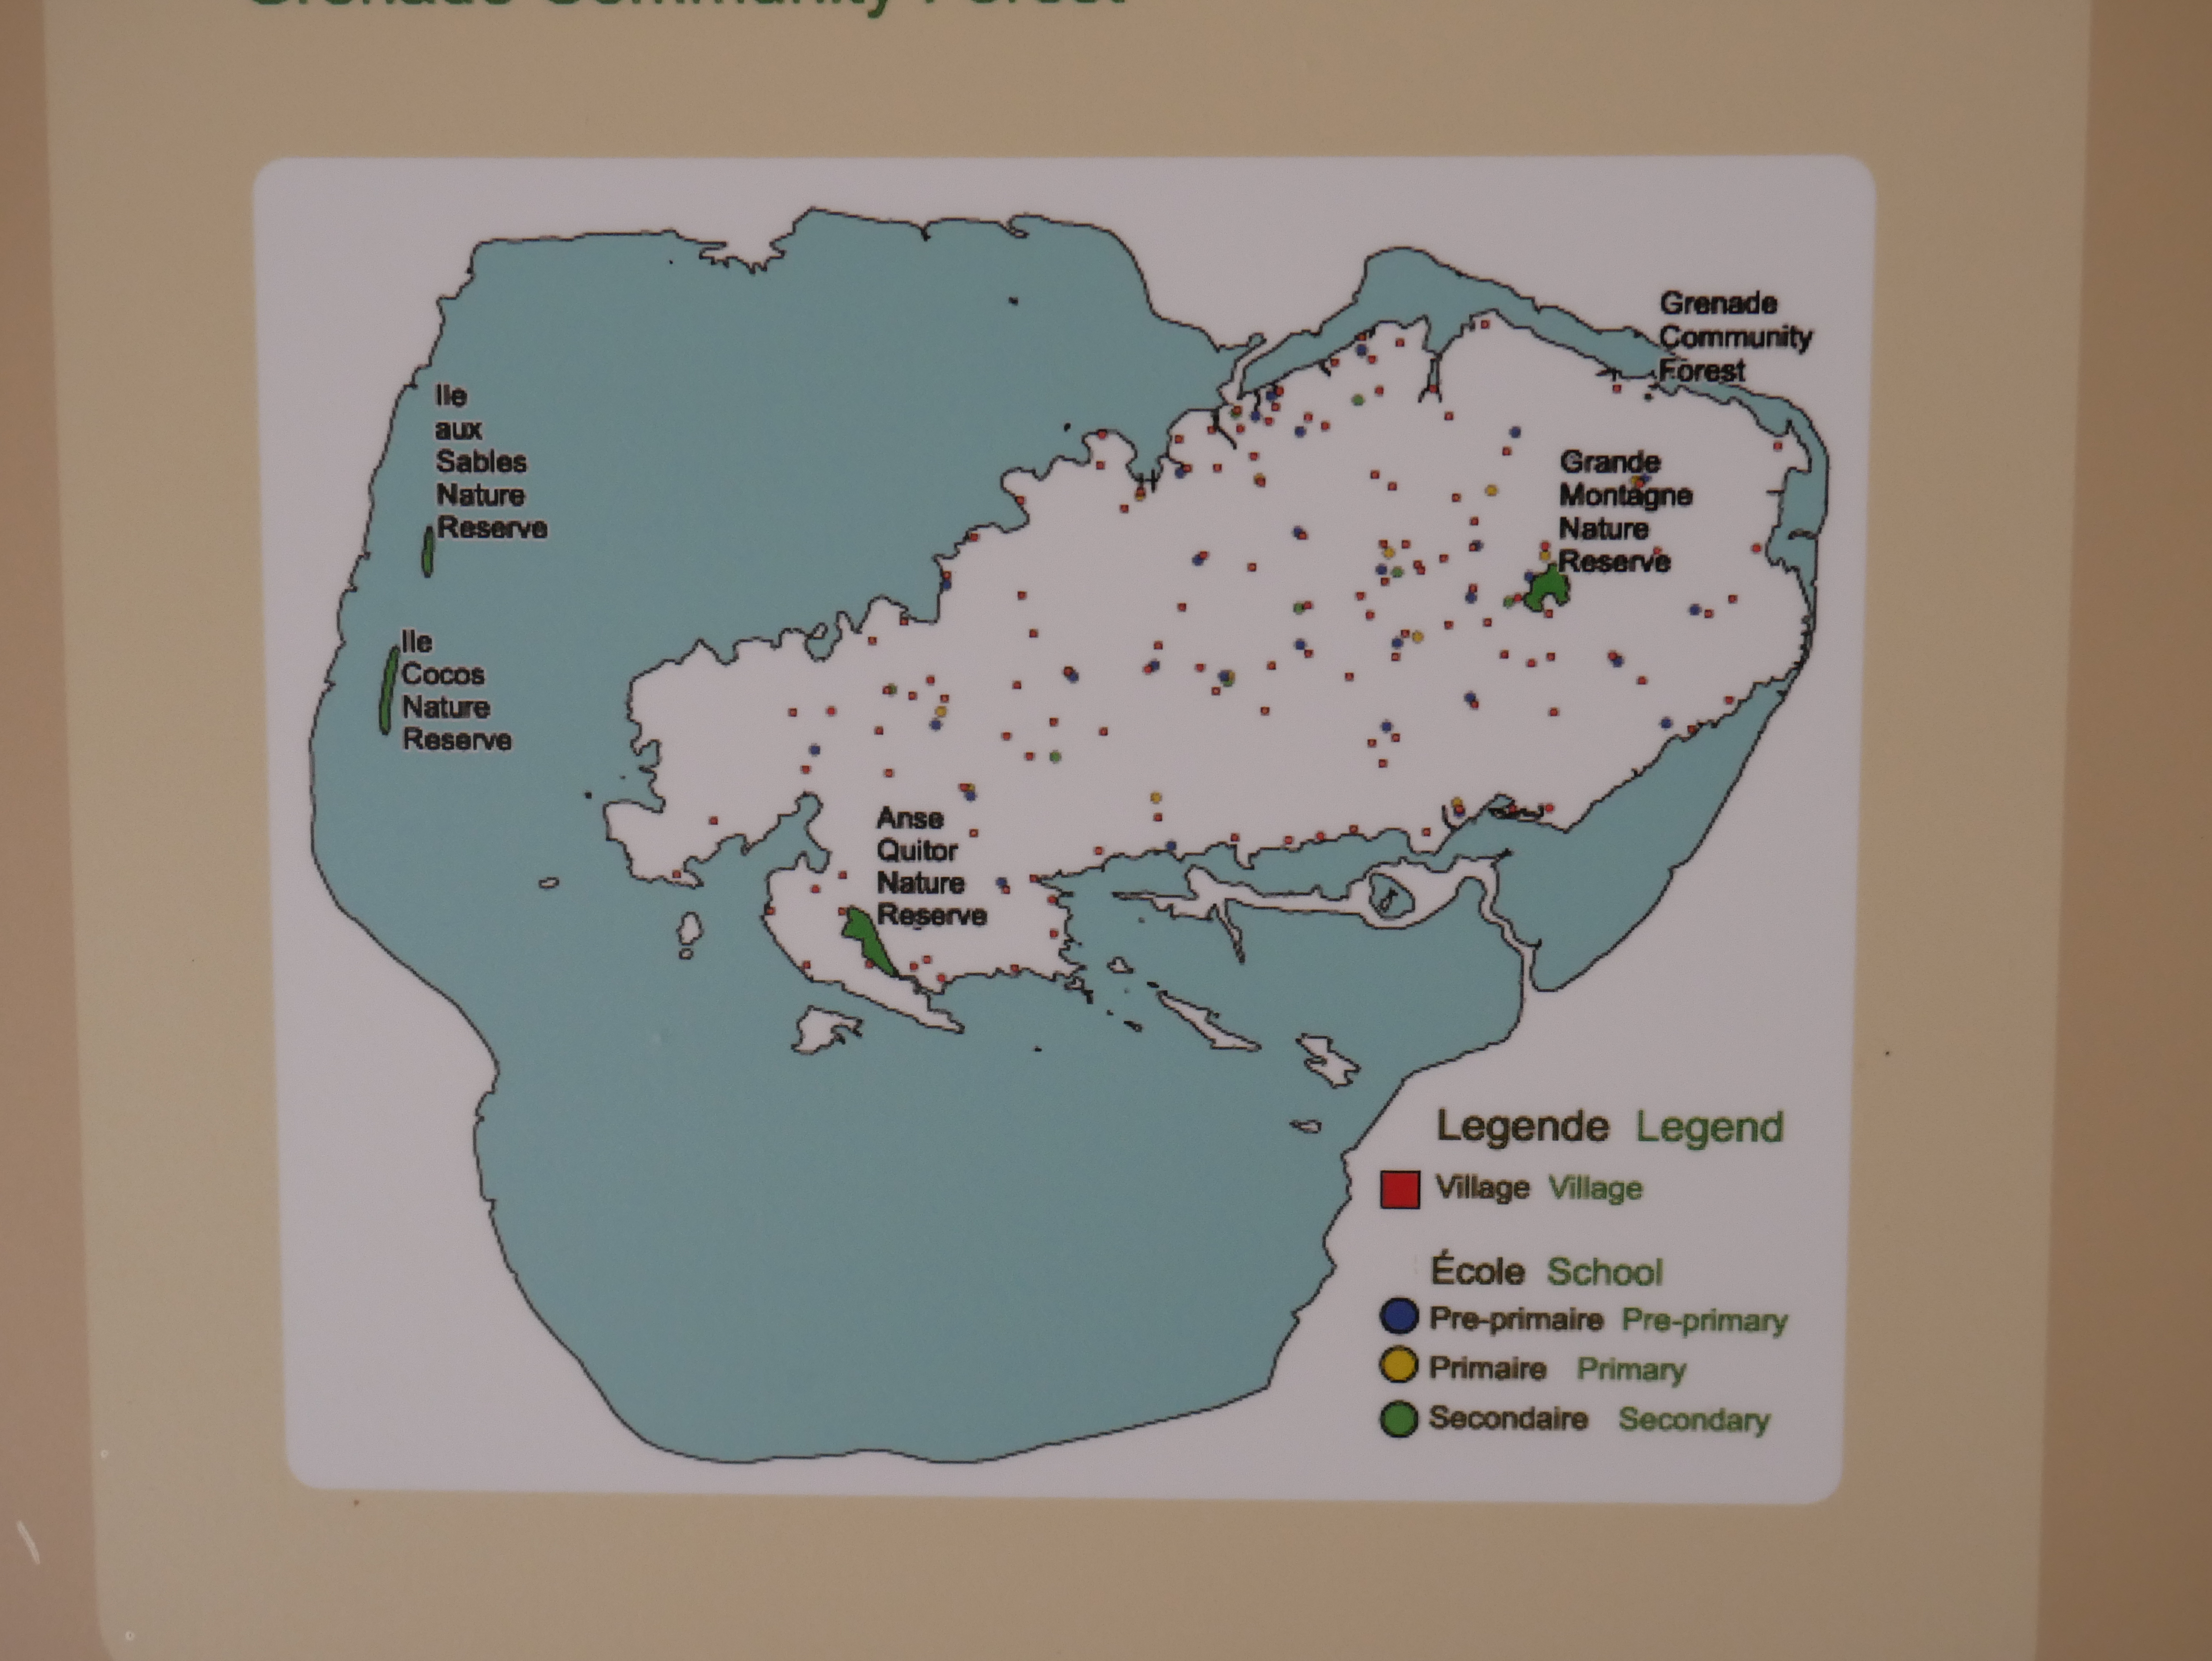 Grande Montagne nature reserve Rodrigues island map of nature reserves and protected areas